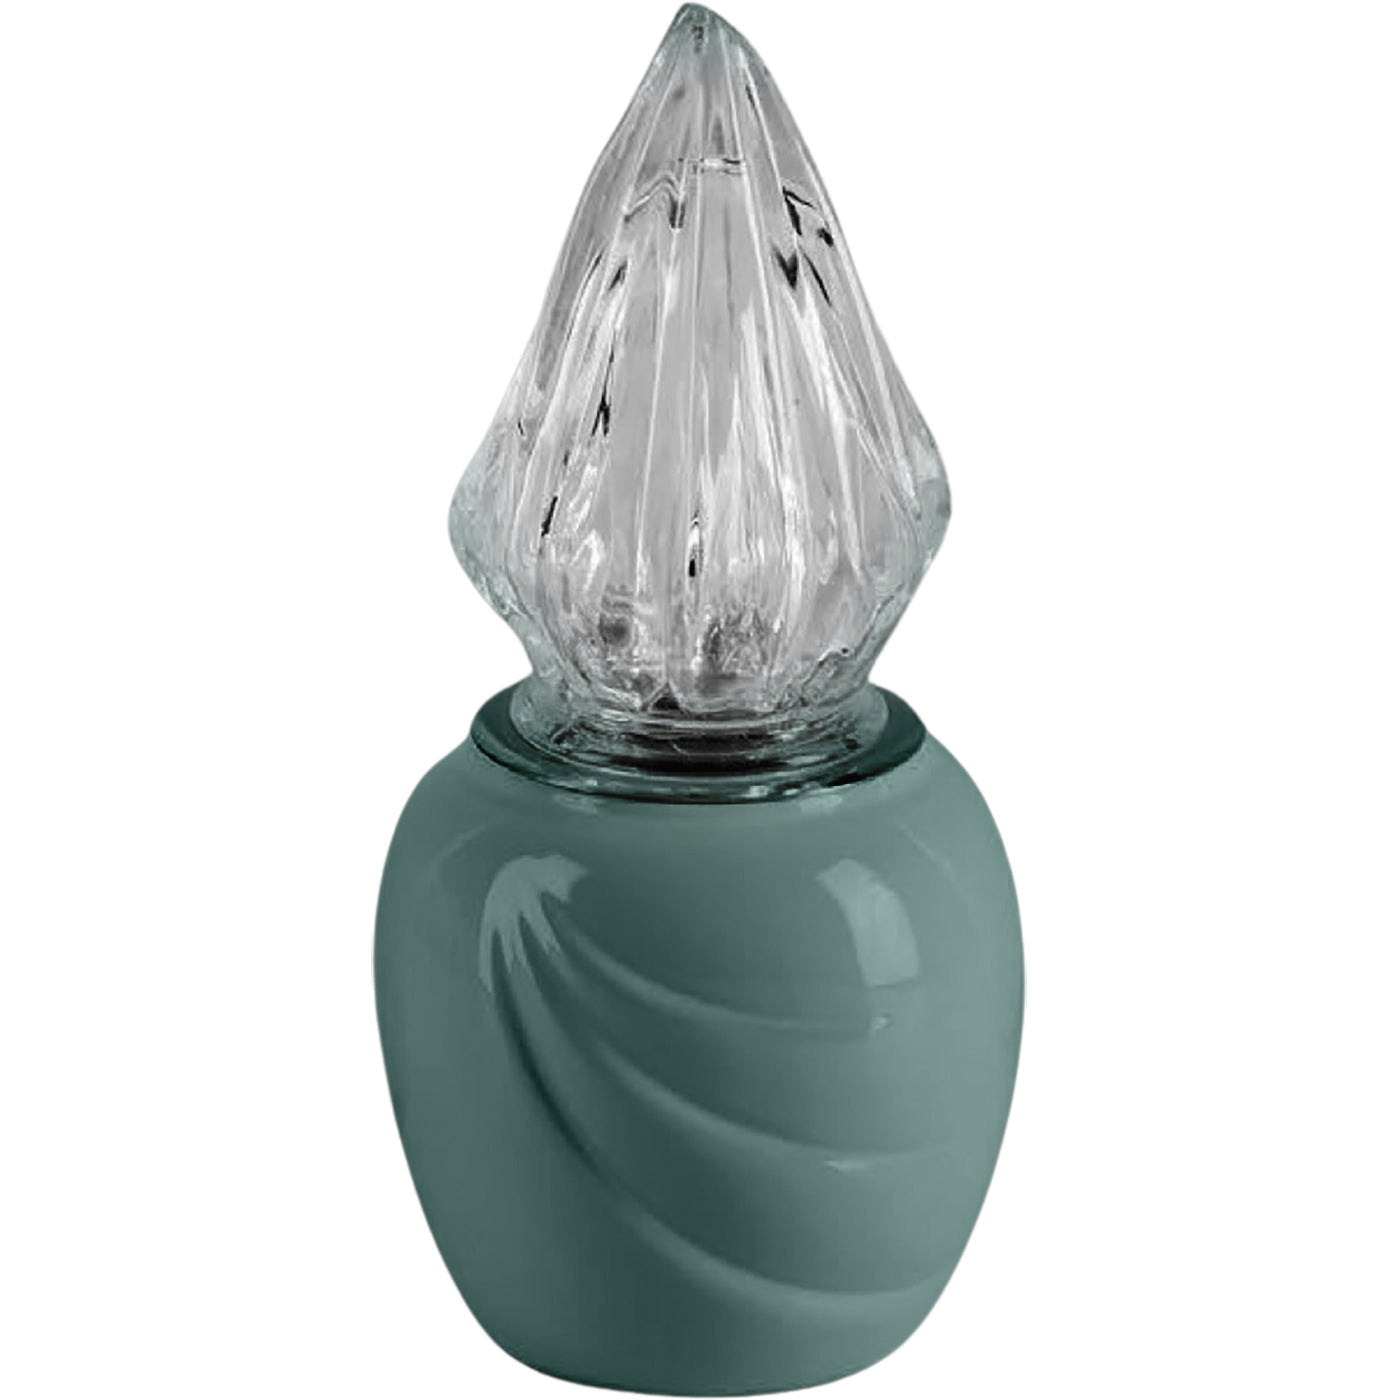 Grave light Ecotre green 10x10cm - 3.9x3.9in In green porcelain, wall attached ECO152P/V